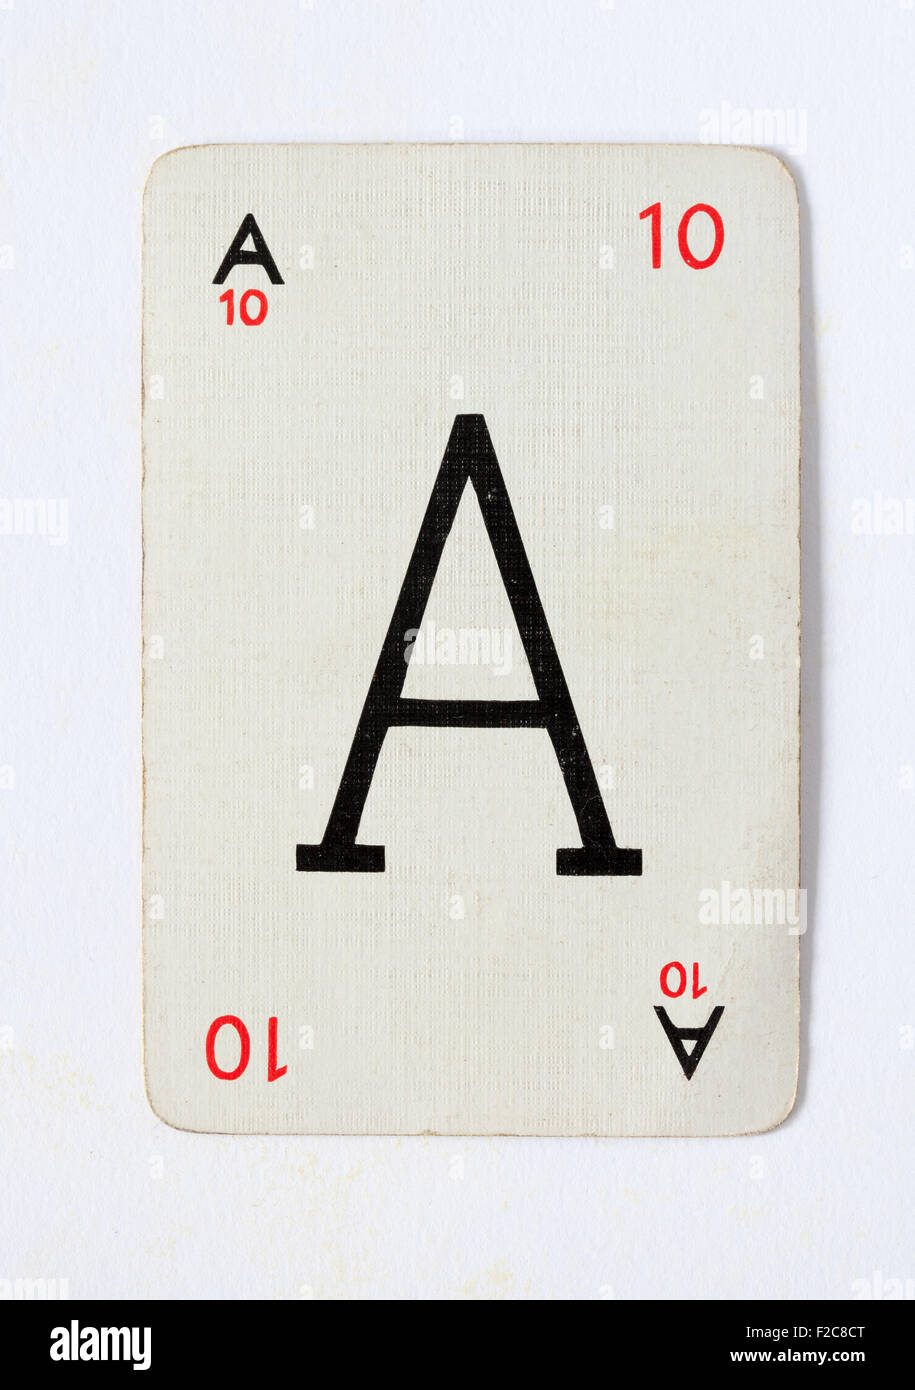 Vintage Lexicon Cards A-Z ~ Letter Cards ~ For crafting.